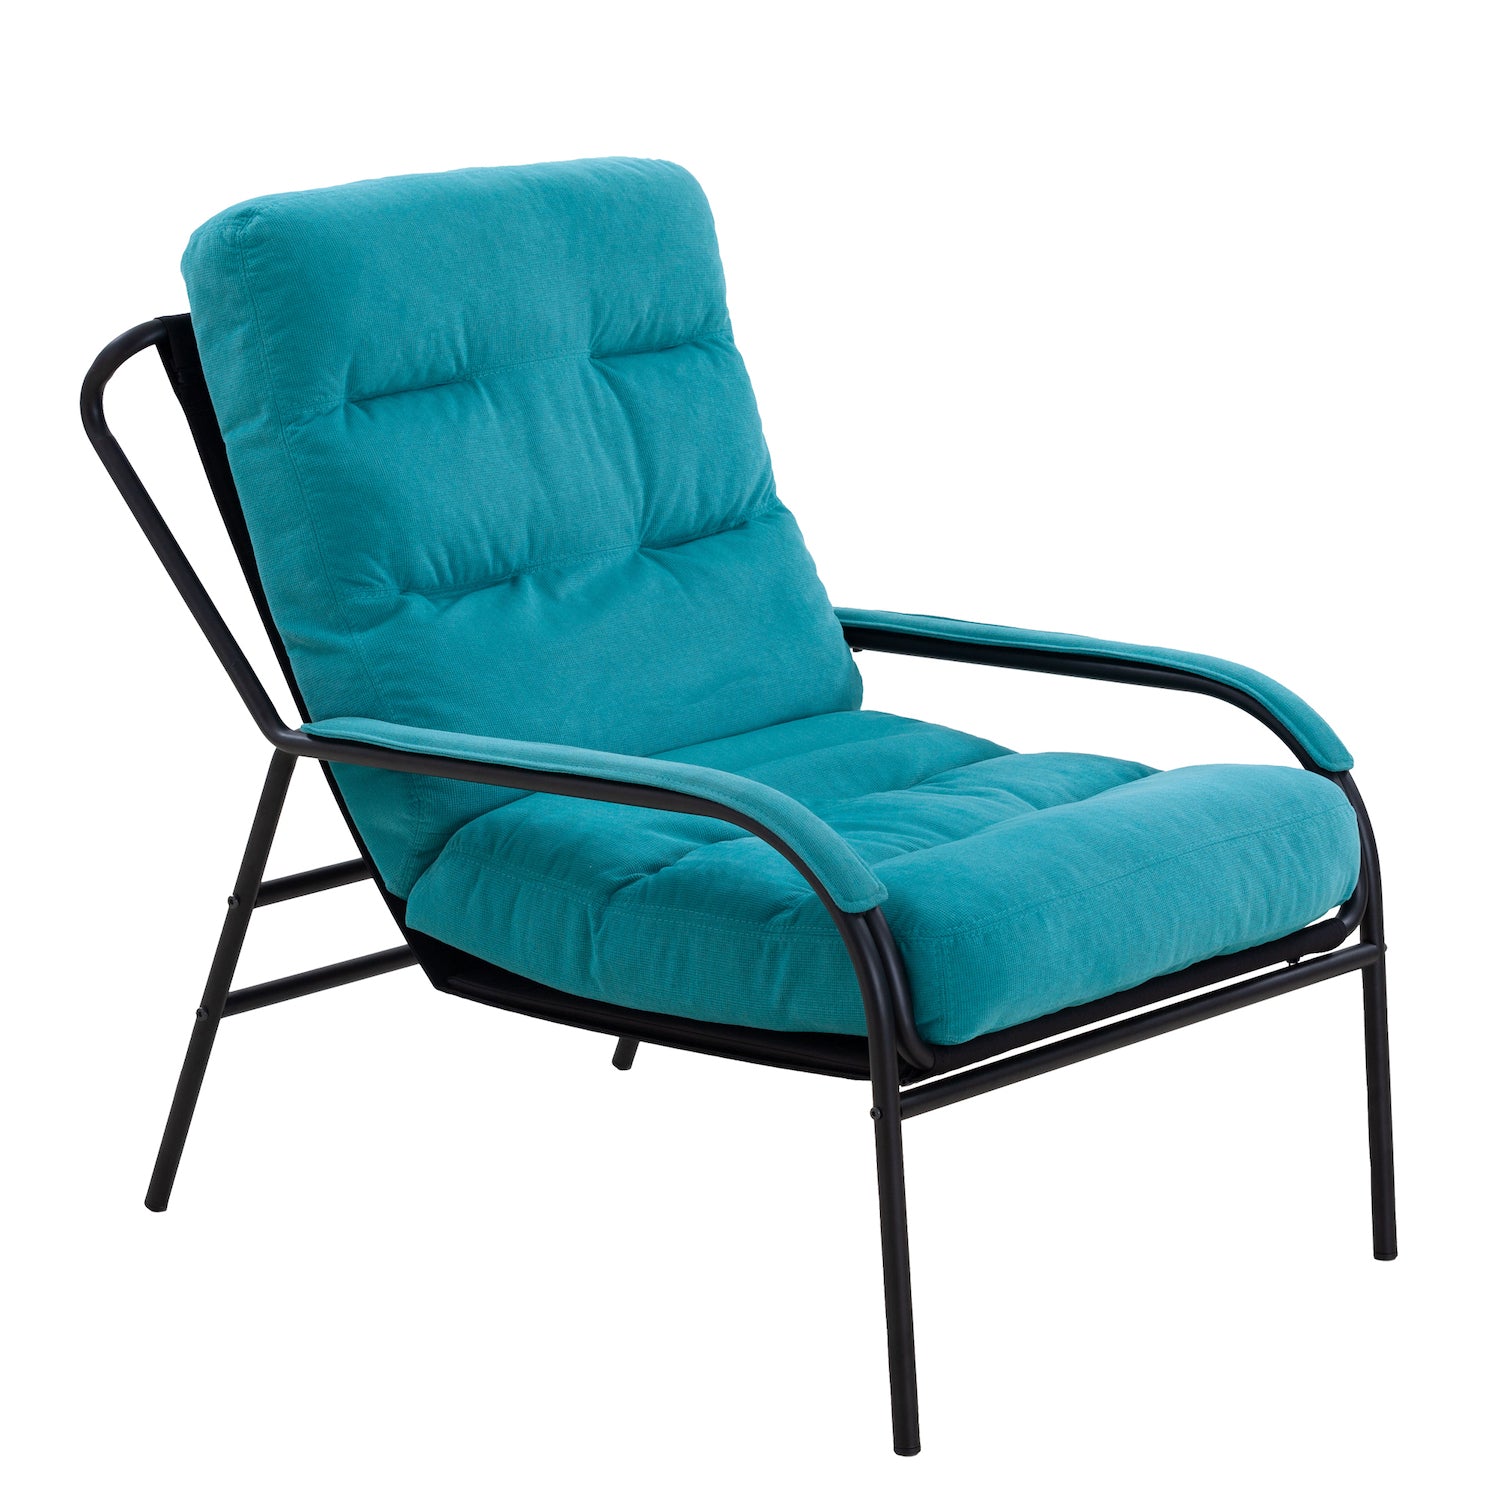 Justone Recline Back Club Chair - Turquoise